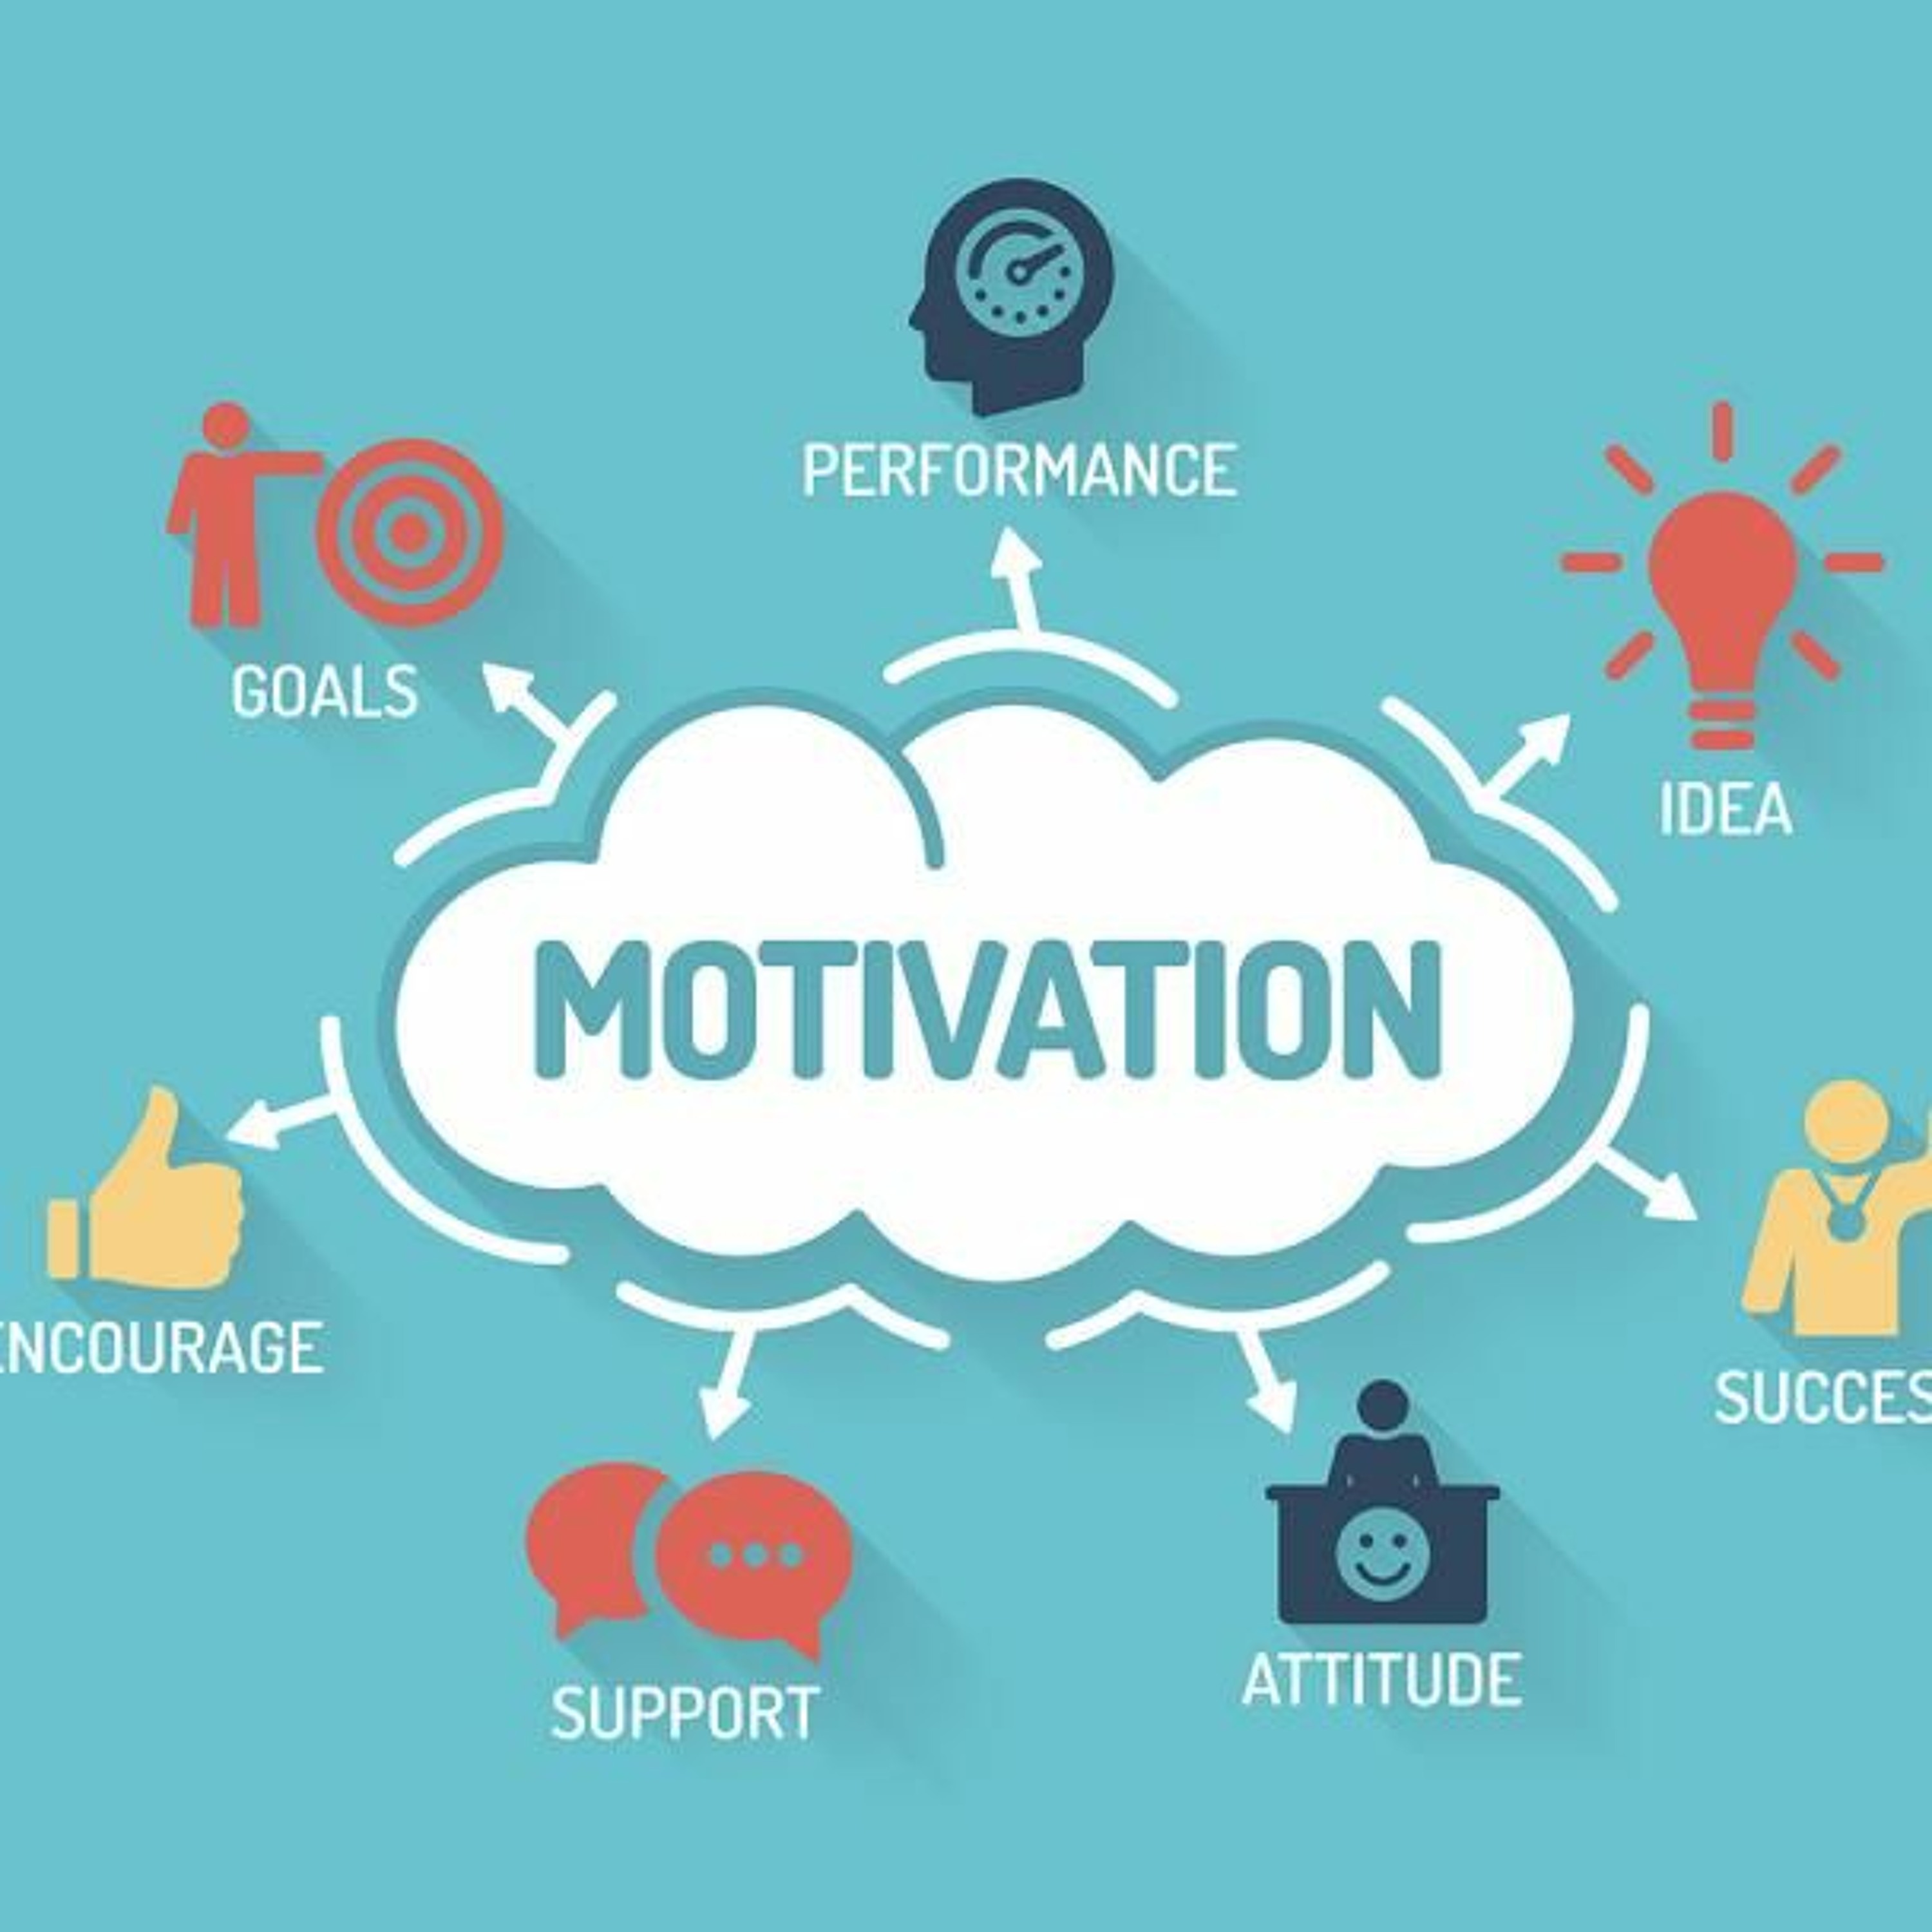 Motivation - Targets As The Key For Motivating People